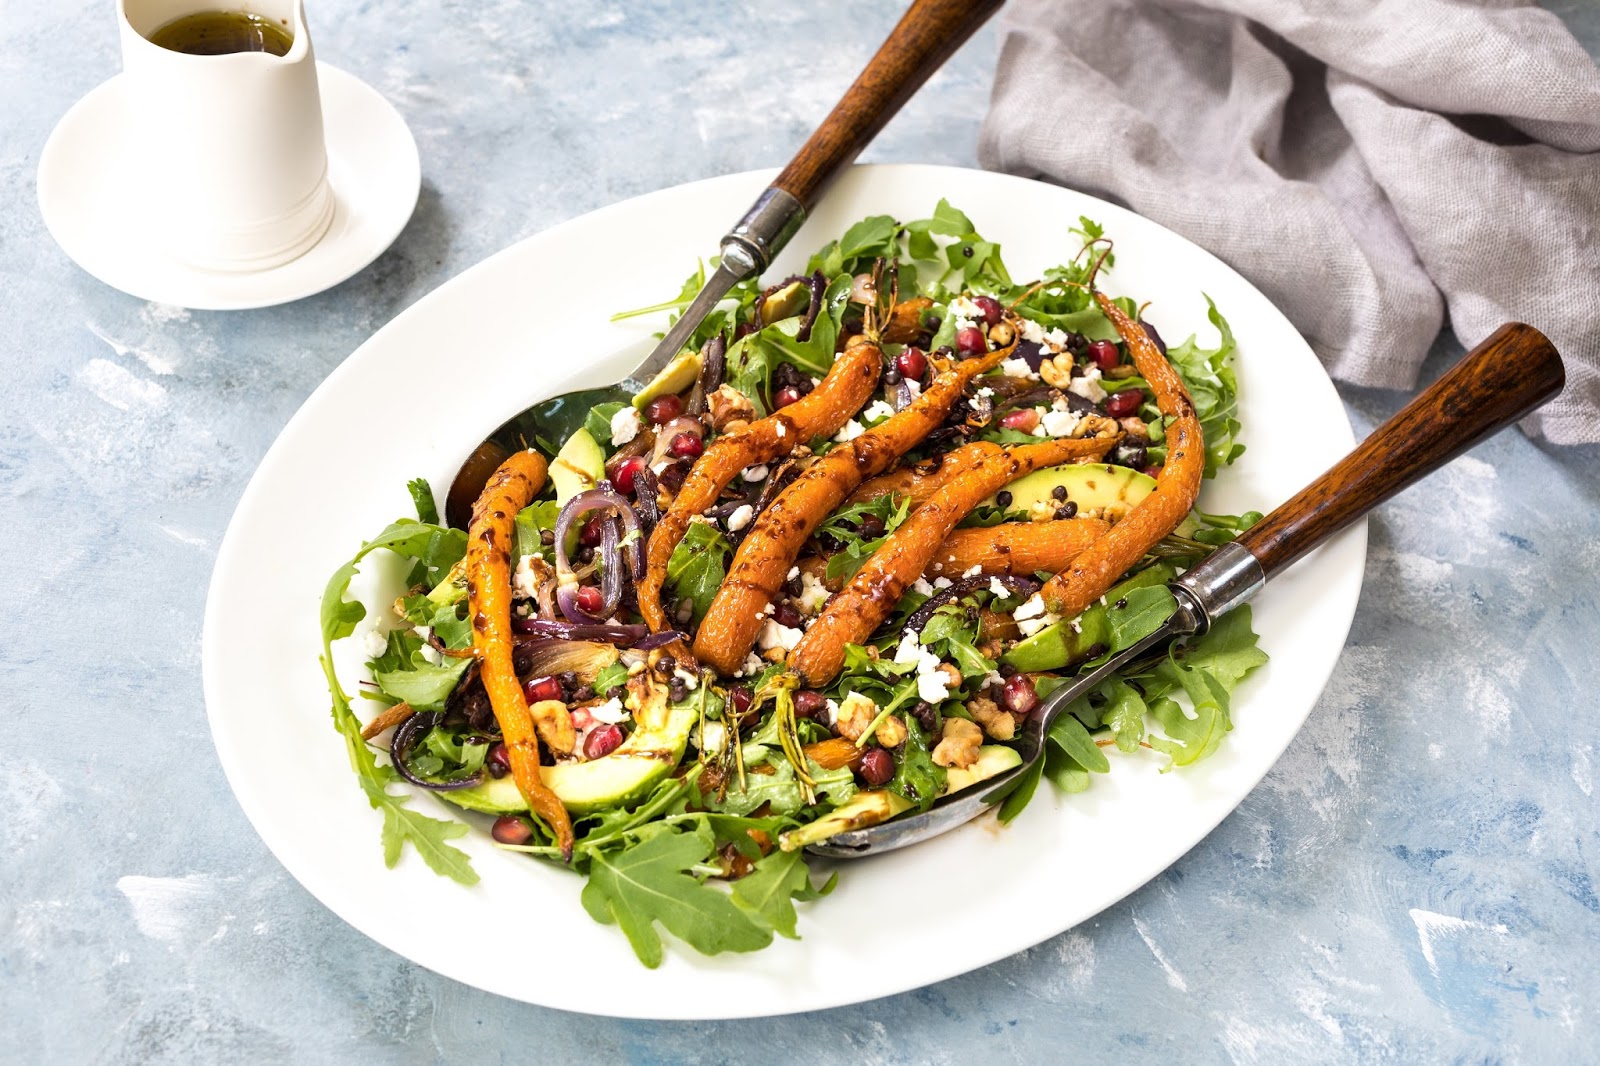 Roasted Baby Carrot Salad With Walnuts, Chickpeas And Feta